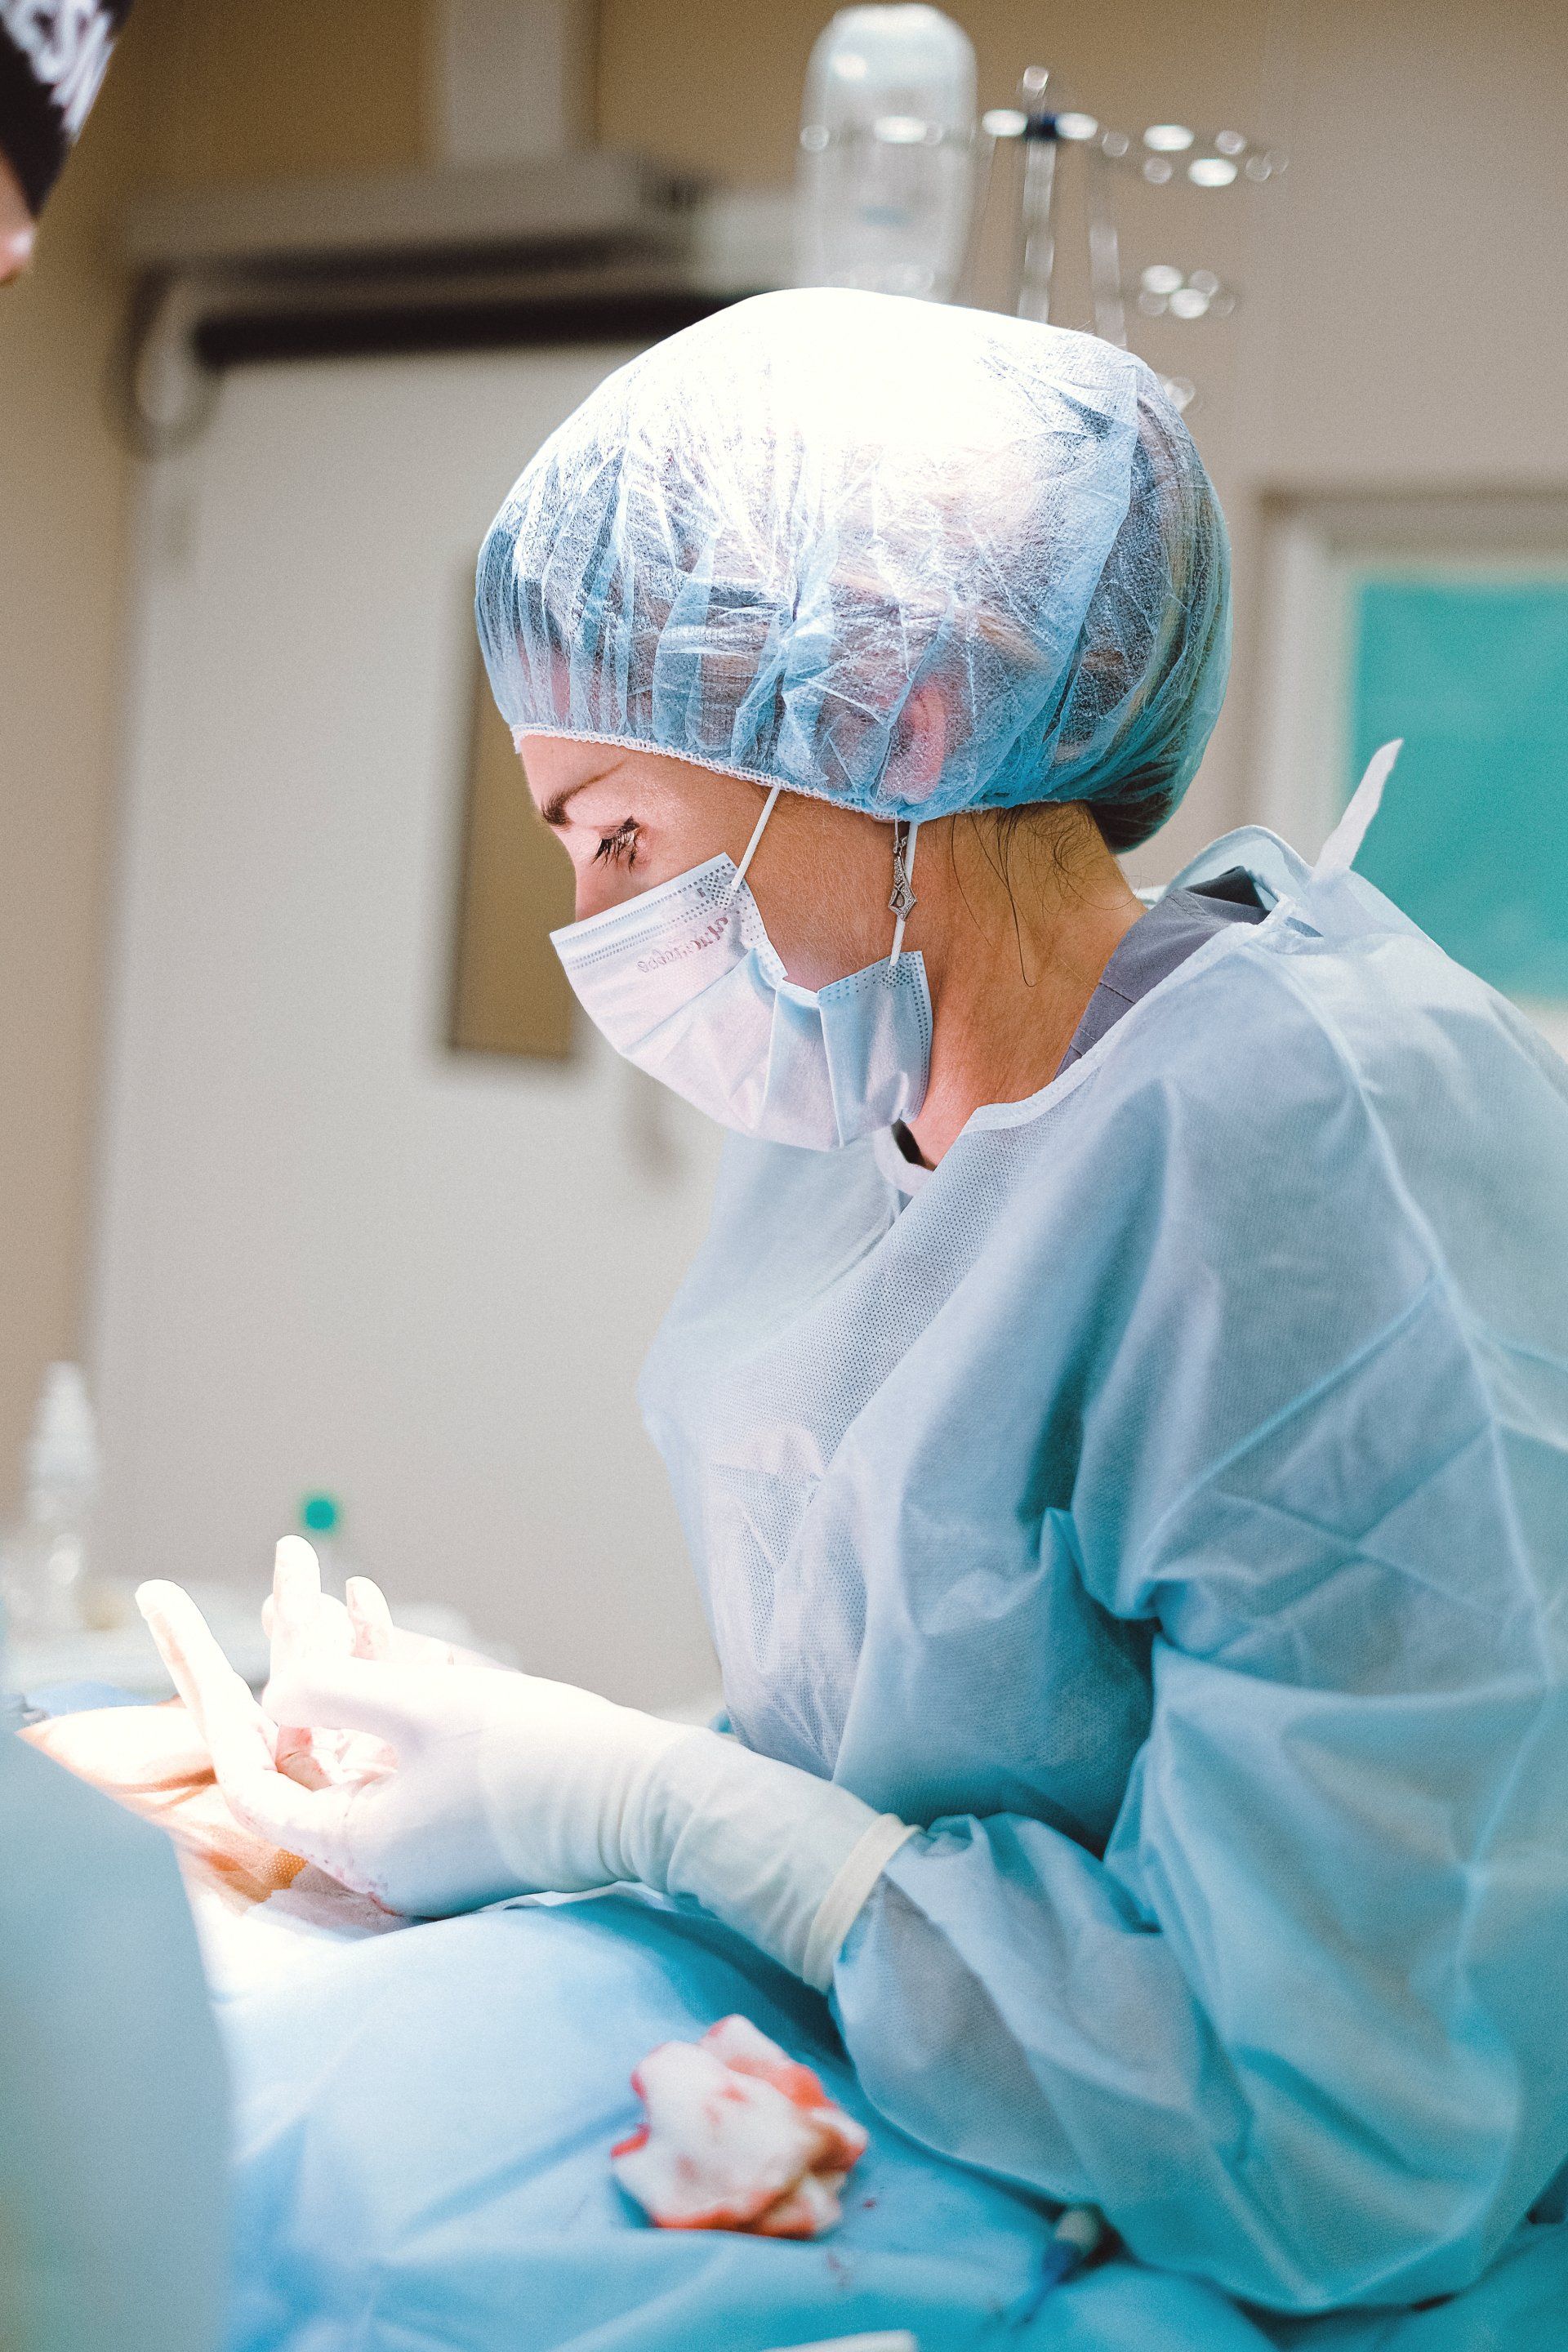 A picture of a hair transplant surgeon at work